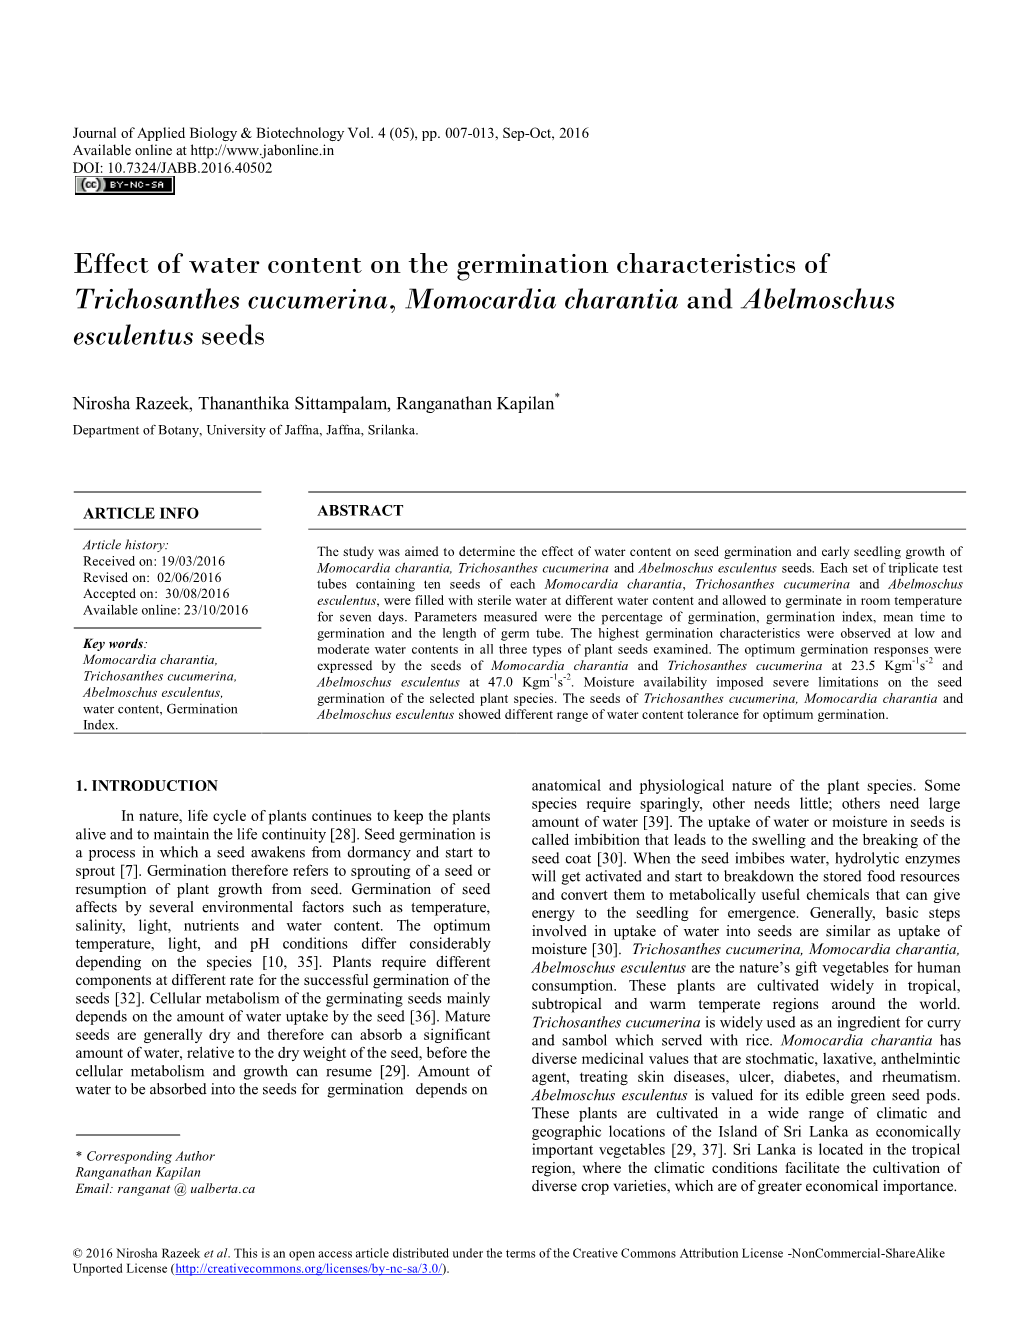 Effect of Water Content on the Germination Characteristics of Trichosanthes Cucumerina, Momocardia Charantia and Abelmoschus Esculentus Seeds